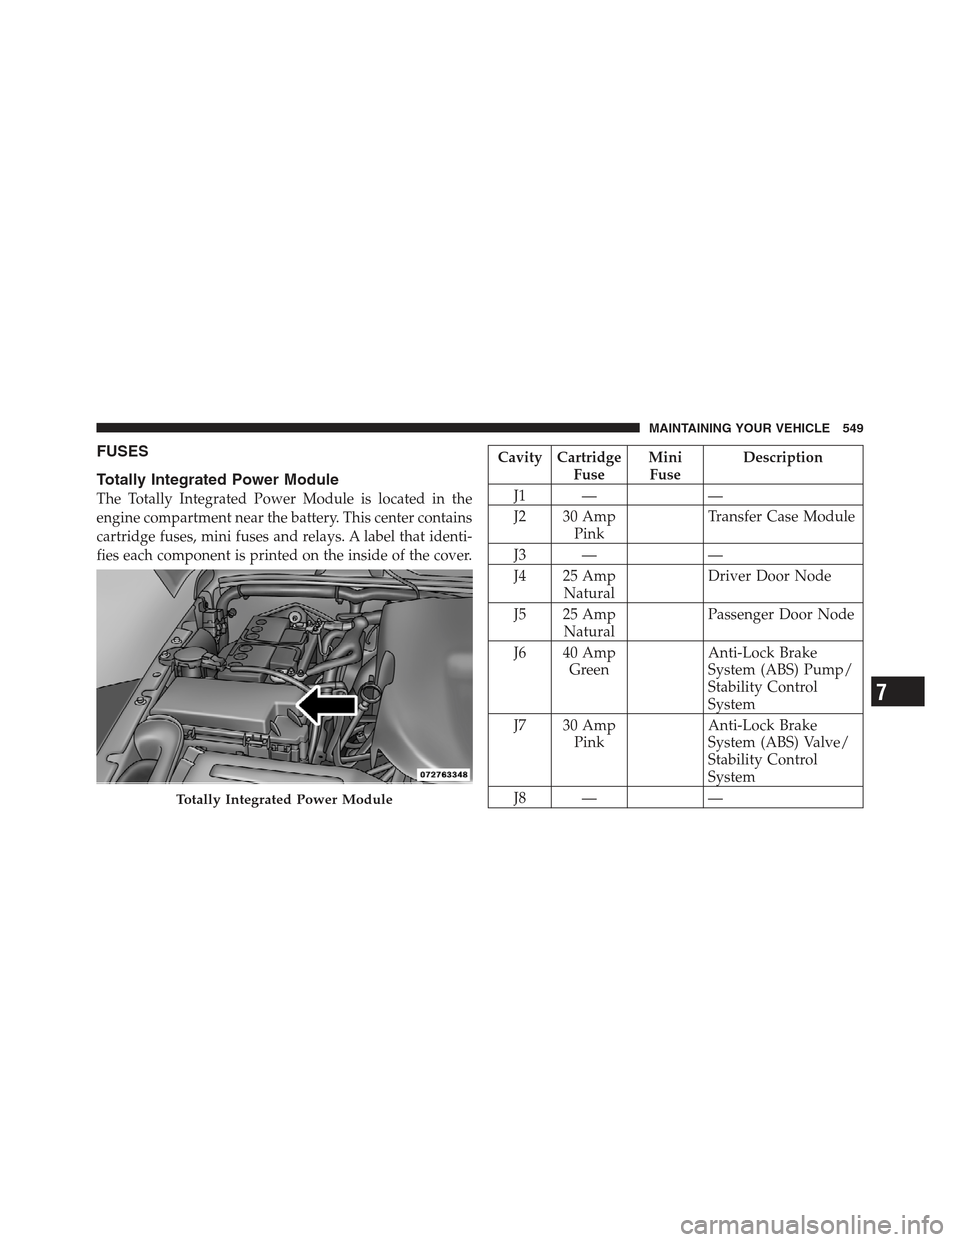 JEEP WRANGLER 2012 JK / 3.G Owners Manual FUSES
Totally Integrated Power Module
The Totally Integrated Power Module is located in the
engine compartment near the battery. This center contains
cartridge fuses, mini fuses and relays. A label th